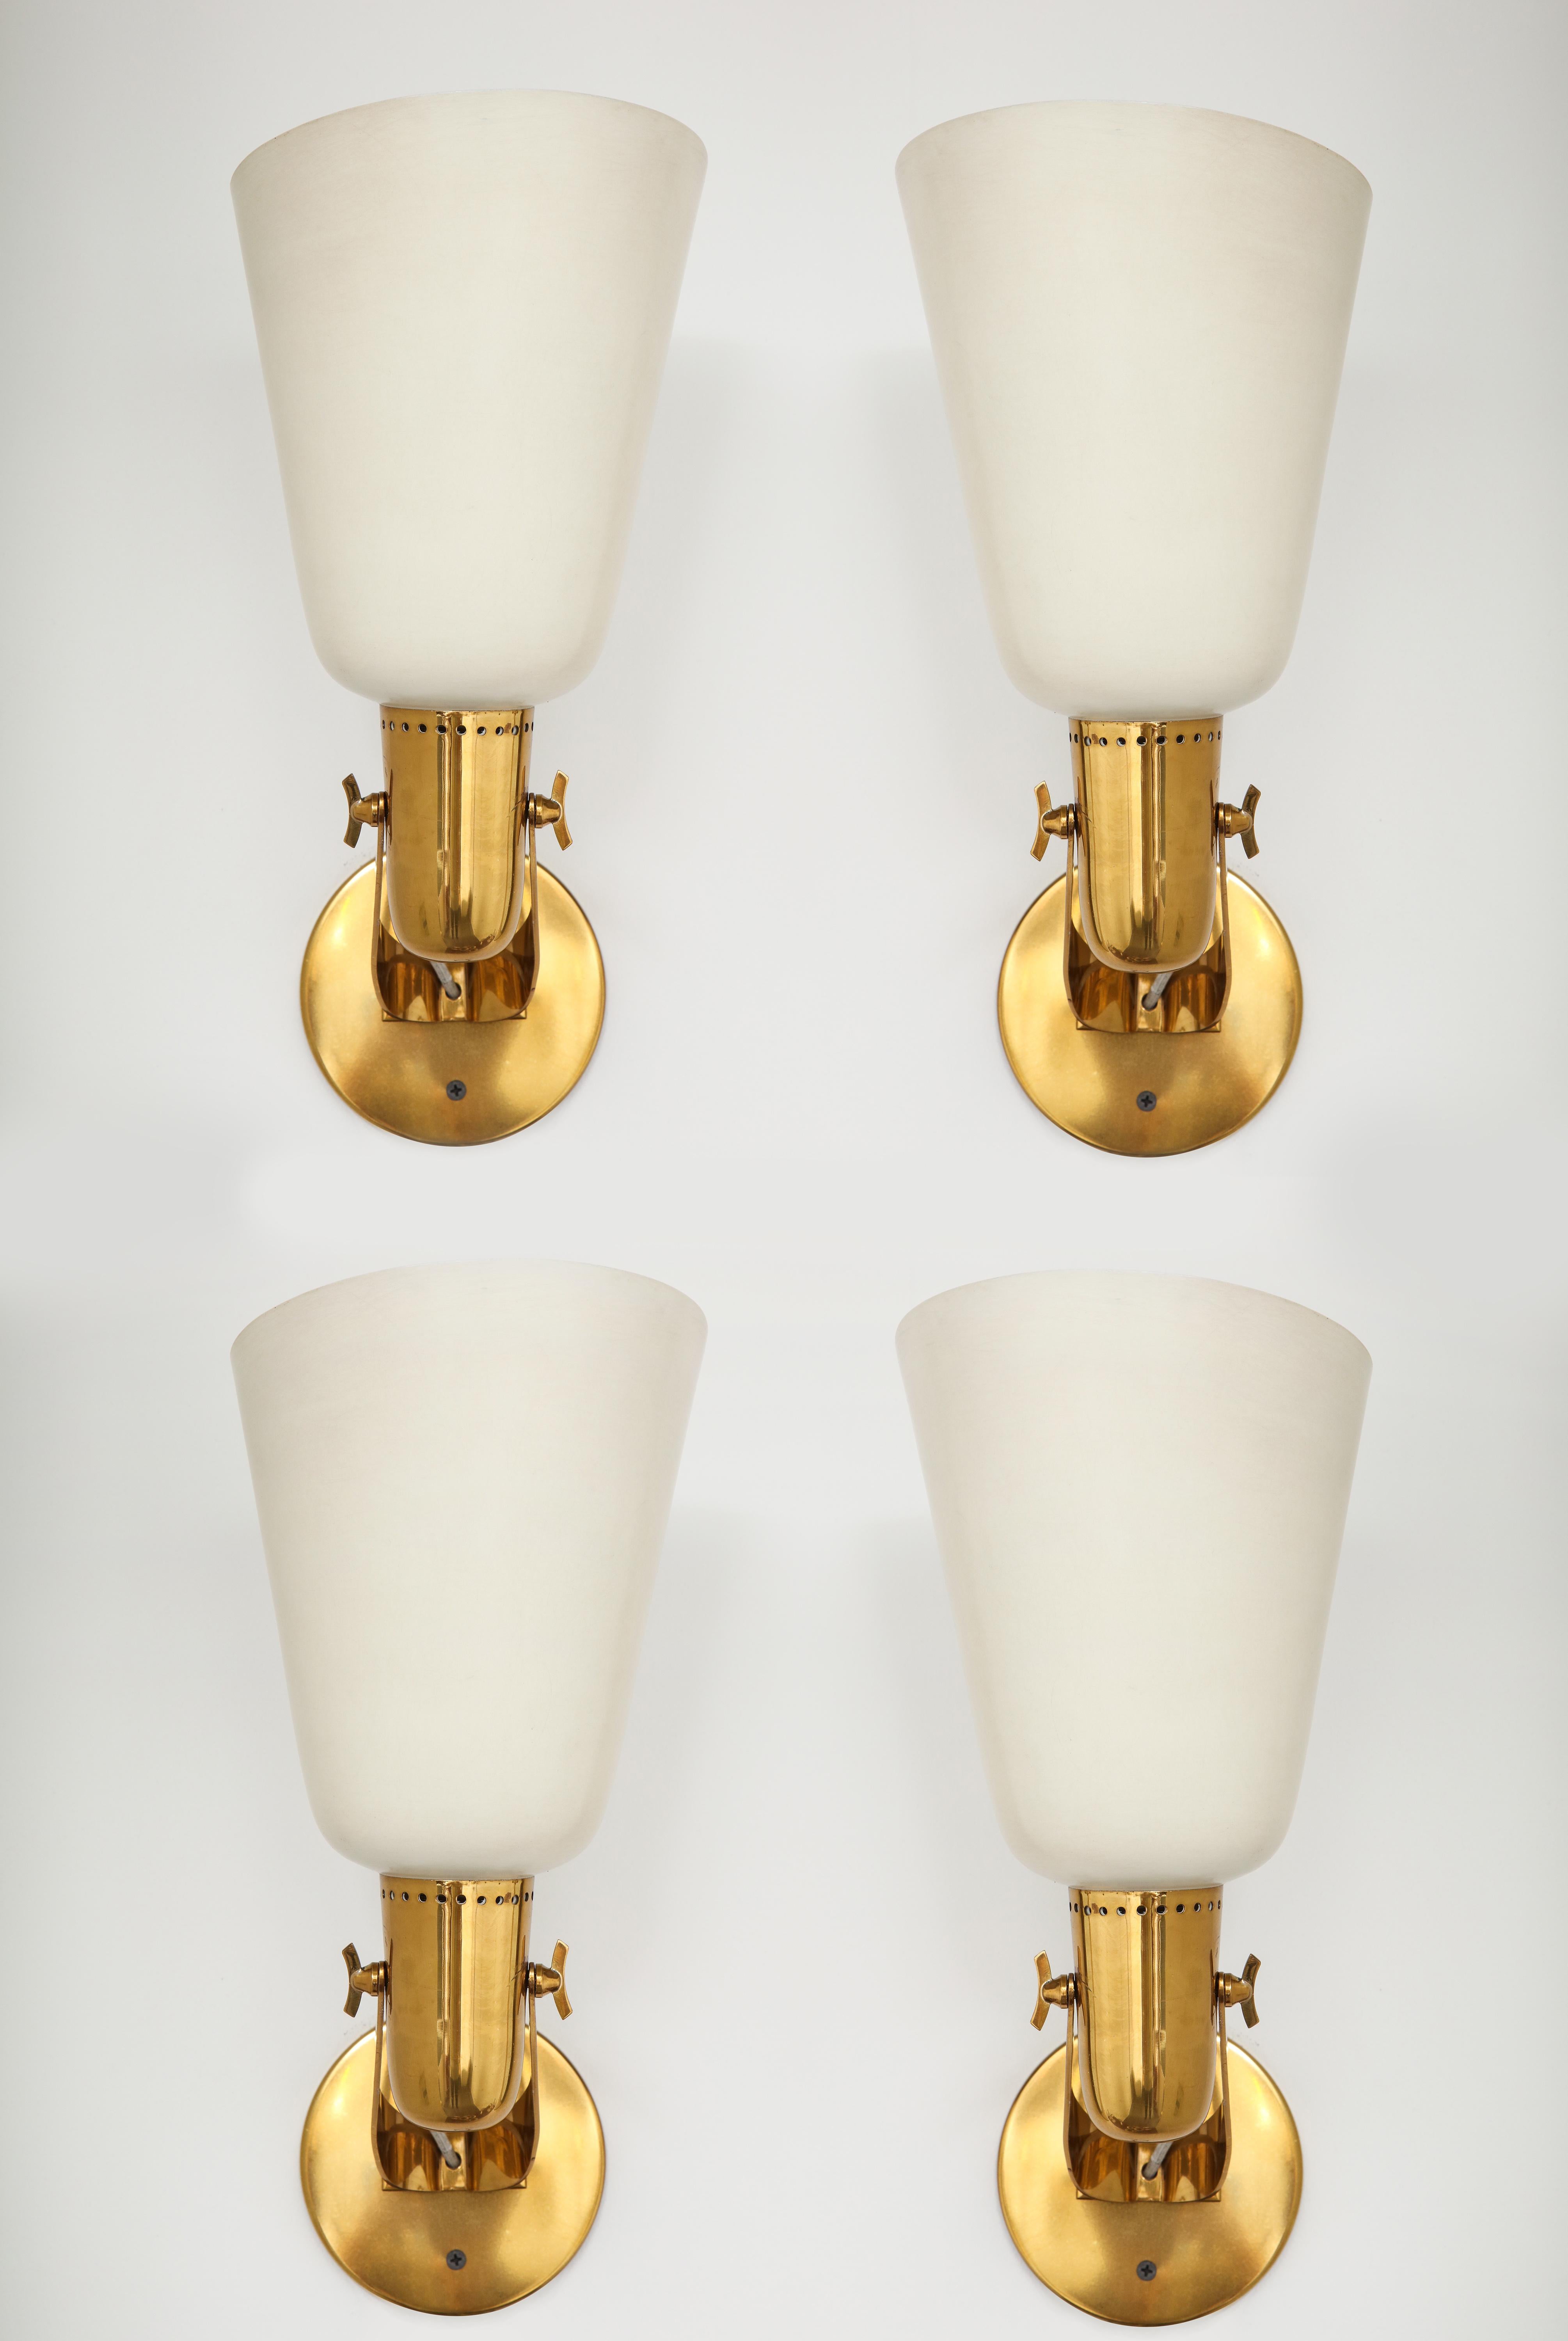 Gino Sarfatti for Arteluce very rare large set of four large sconces with cream lacquered metal shades on brass structures. These sconces are an elegant design with adjustable shades that pivot with butterfly wing nuts. In excellent original